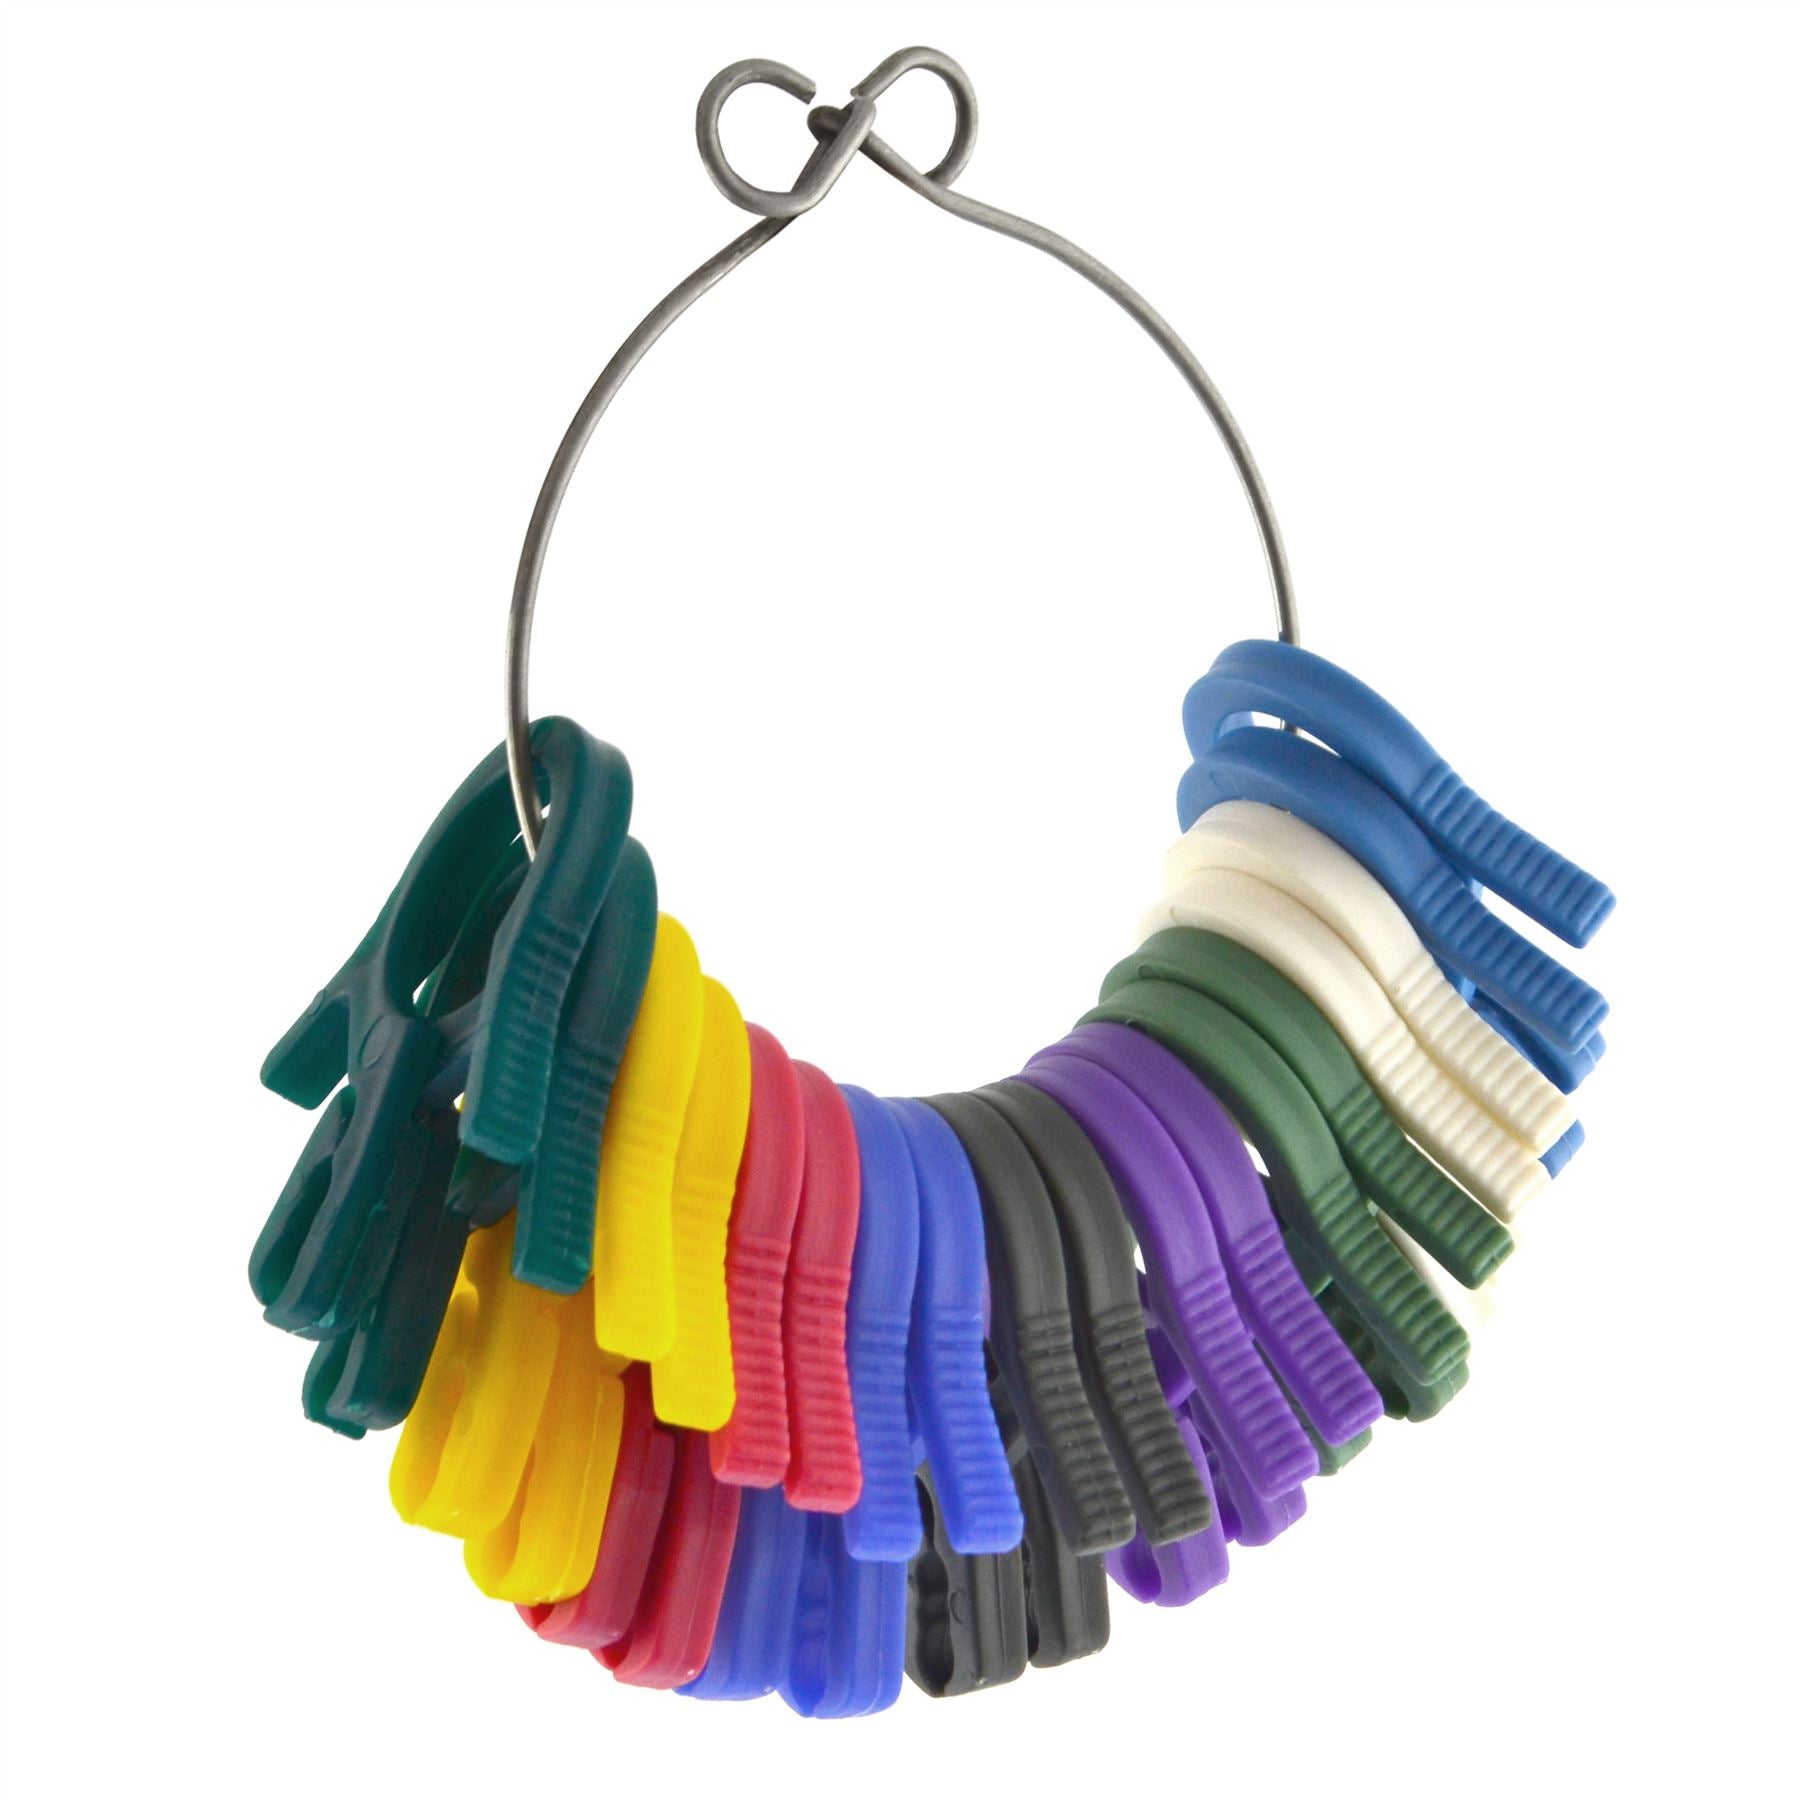 Colour Coded Identification Identifying Clips Tags For Hose Cables 9 pairs AN118